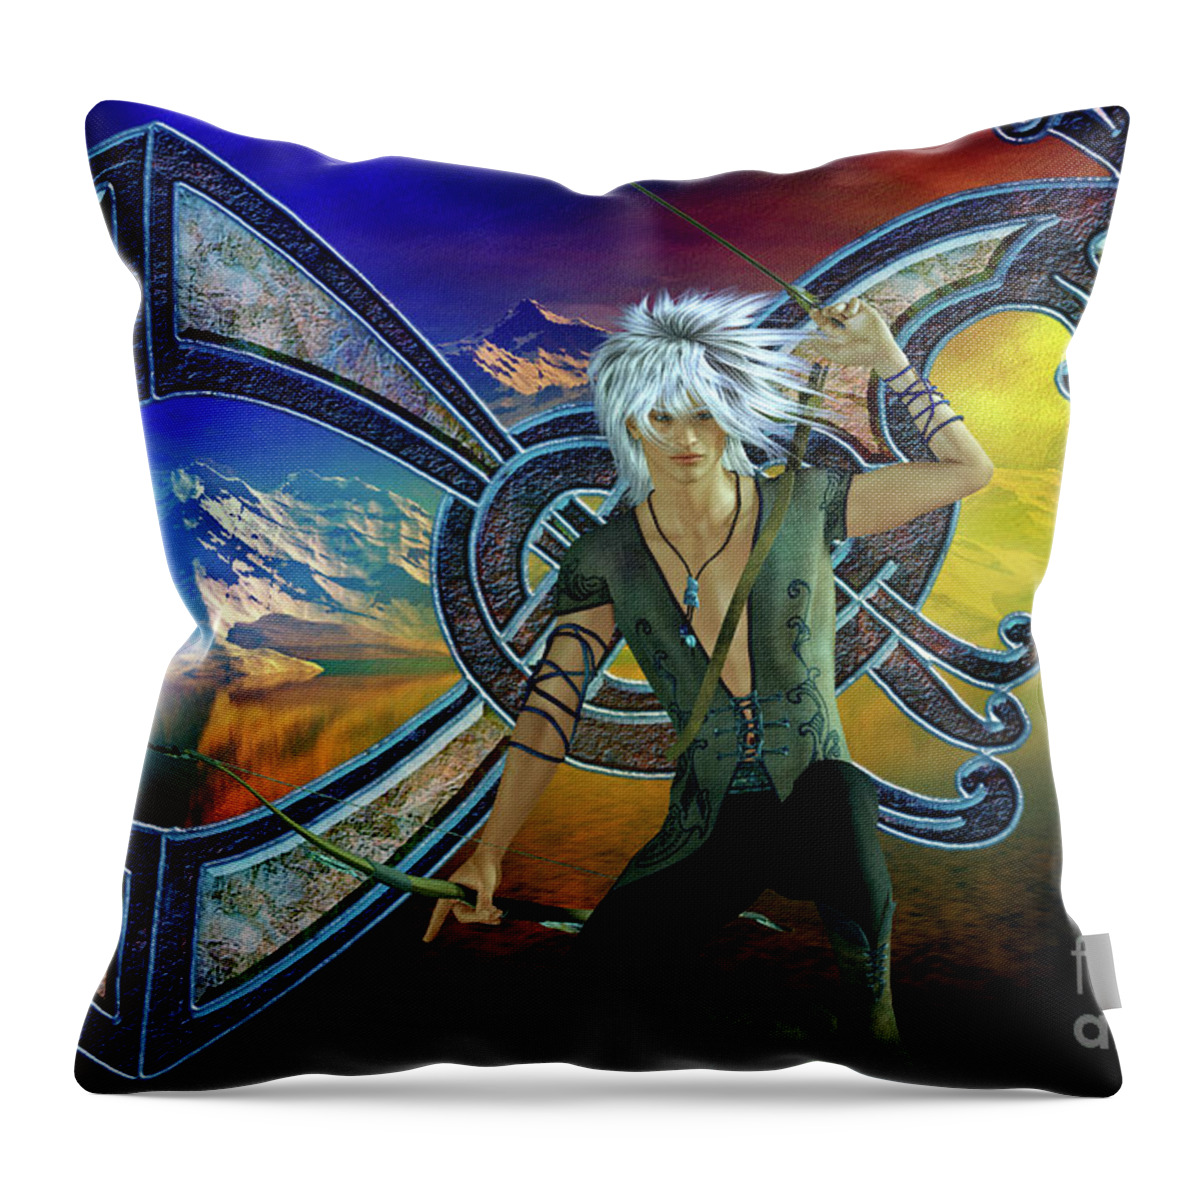 The Norseman Throw Pillow featuring the digital art The Norseman by Shadowlea Is